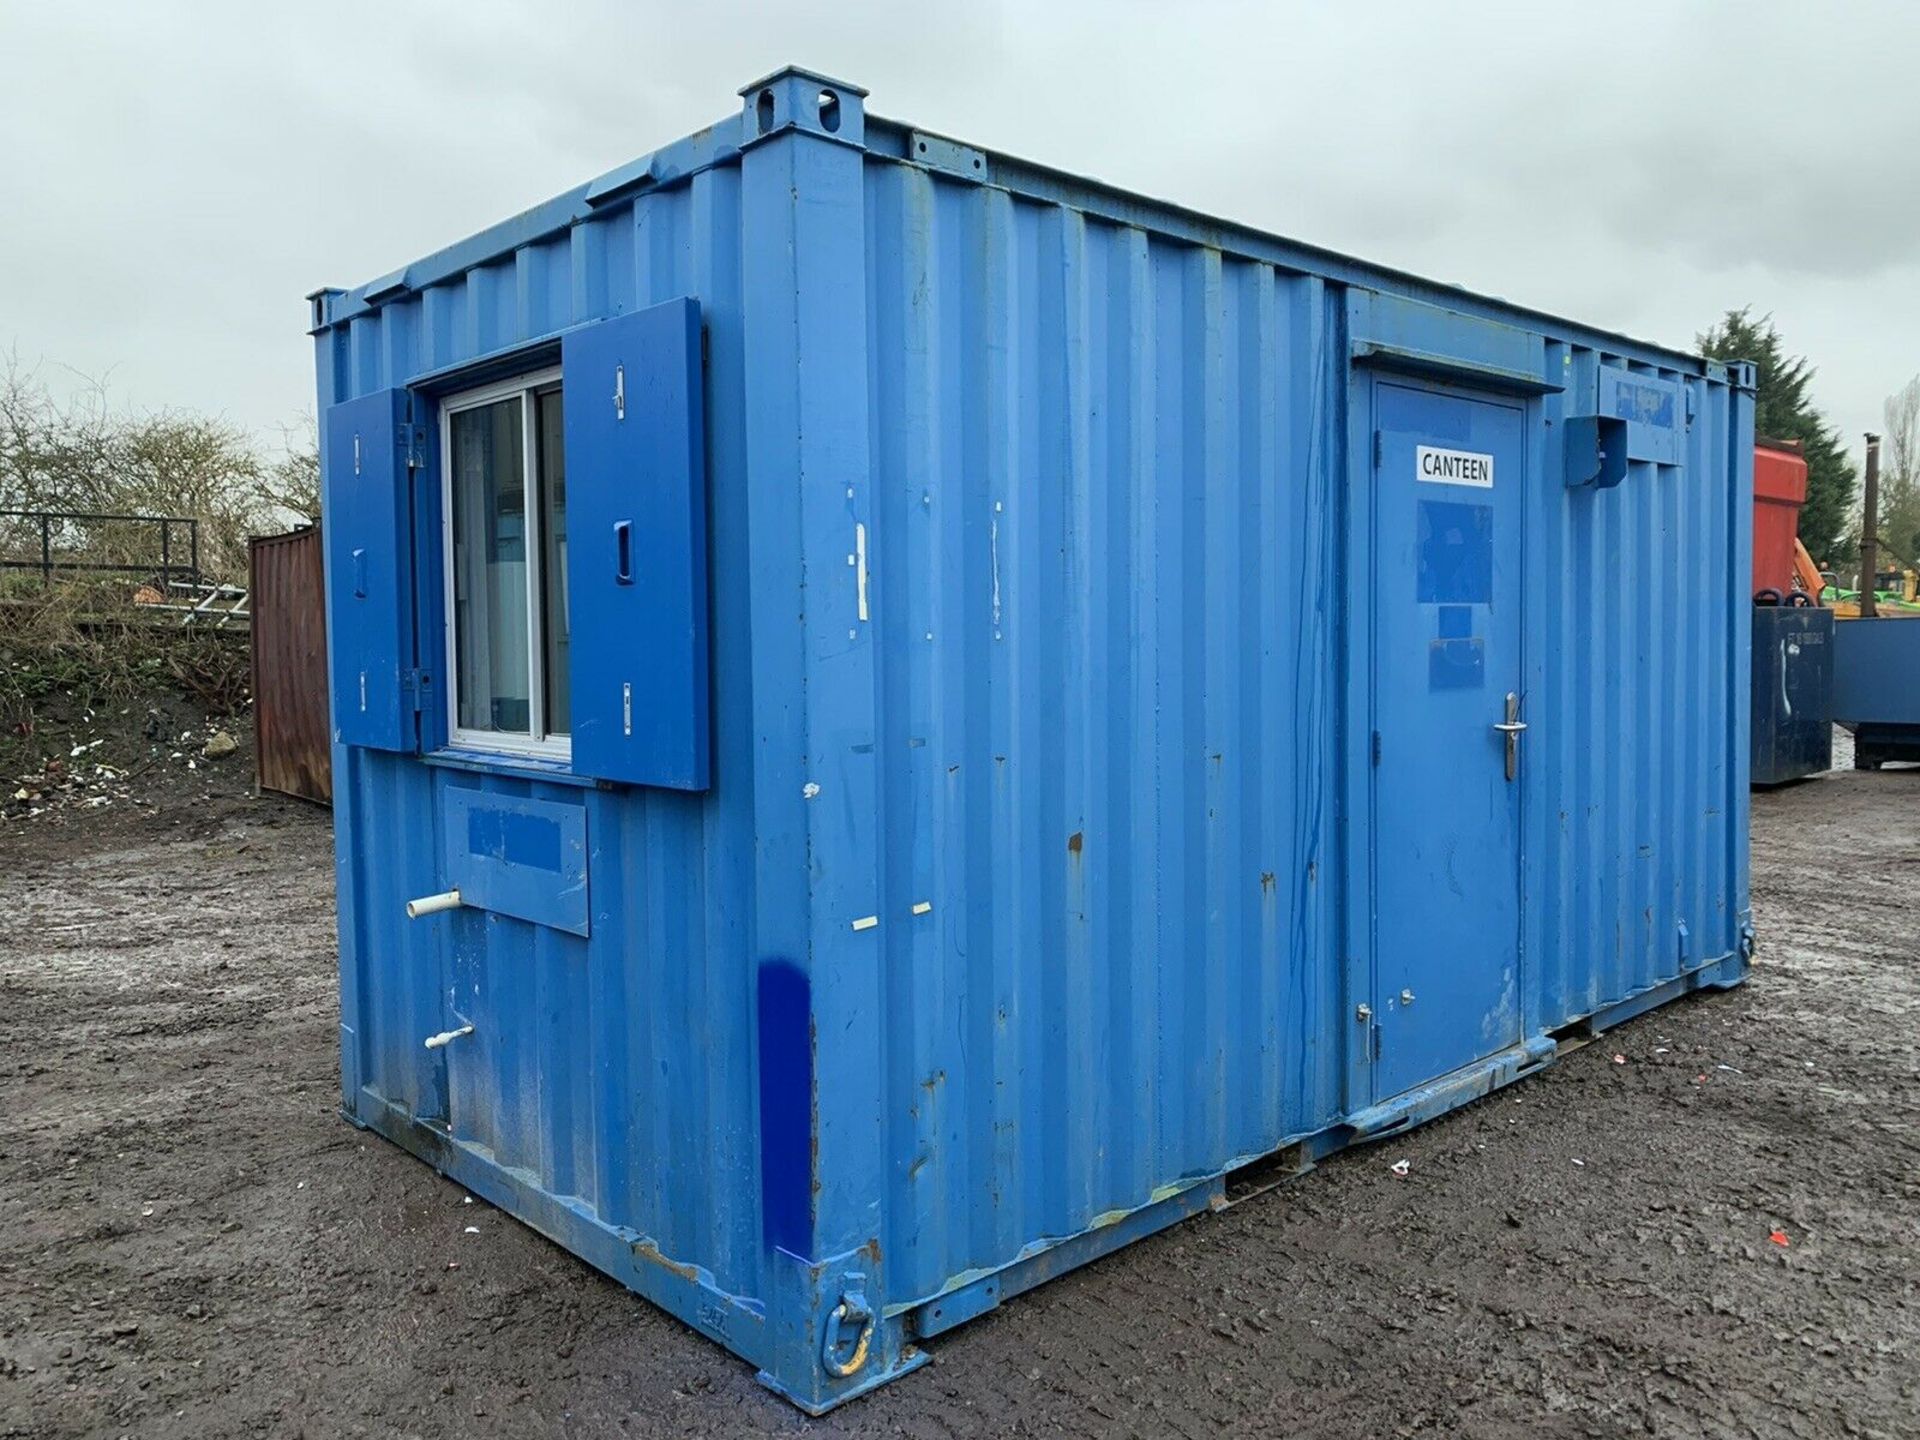 Anti Vandal Steel Portable Office Canteen Drying Room 2016 16ft x 8ft - Image 4 of 11